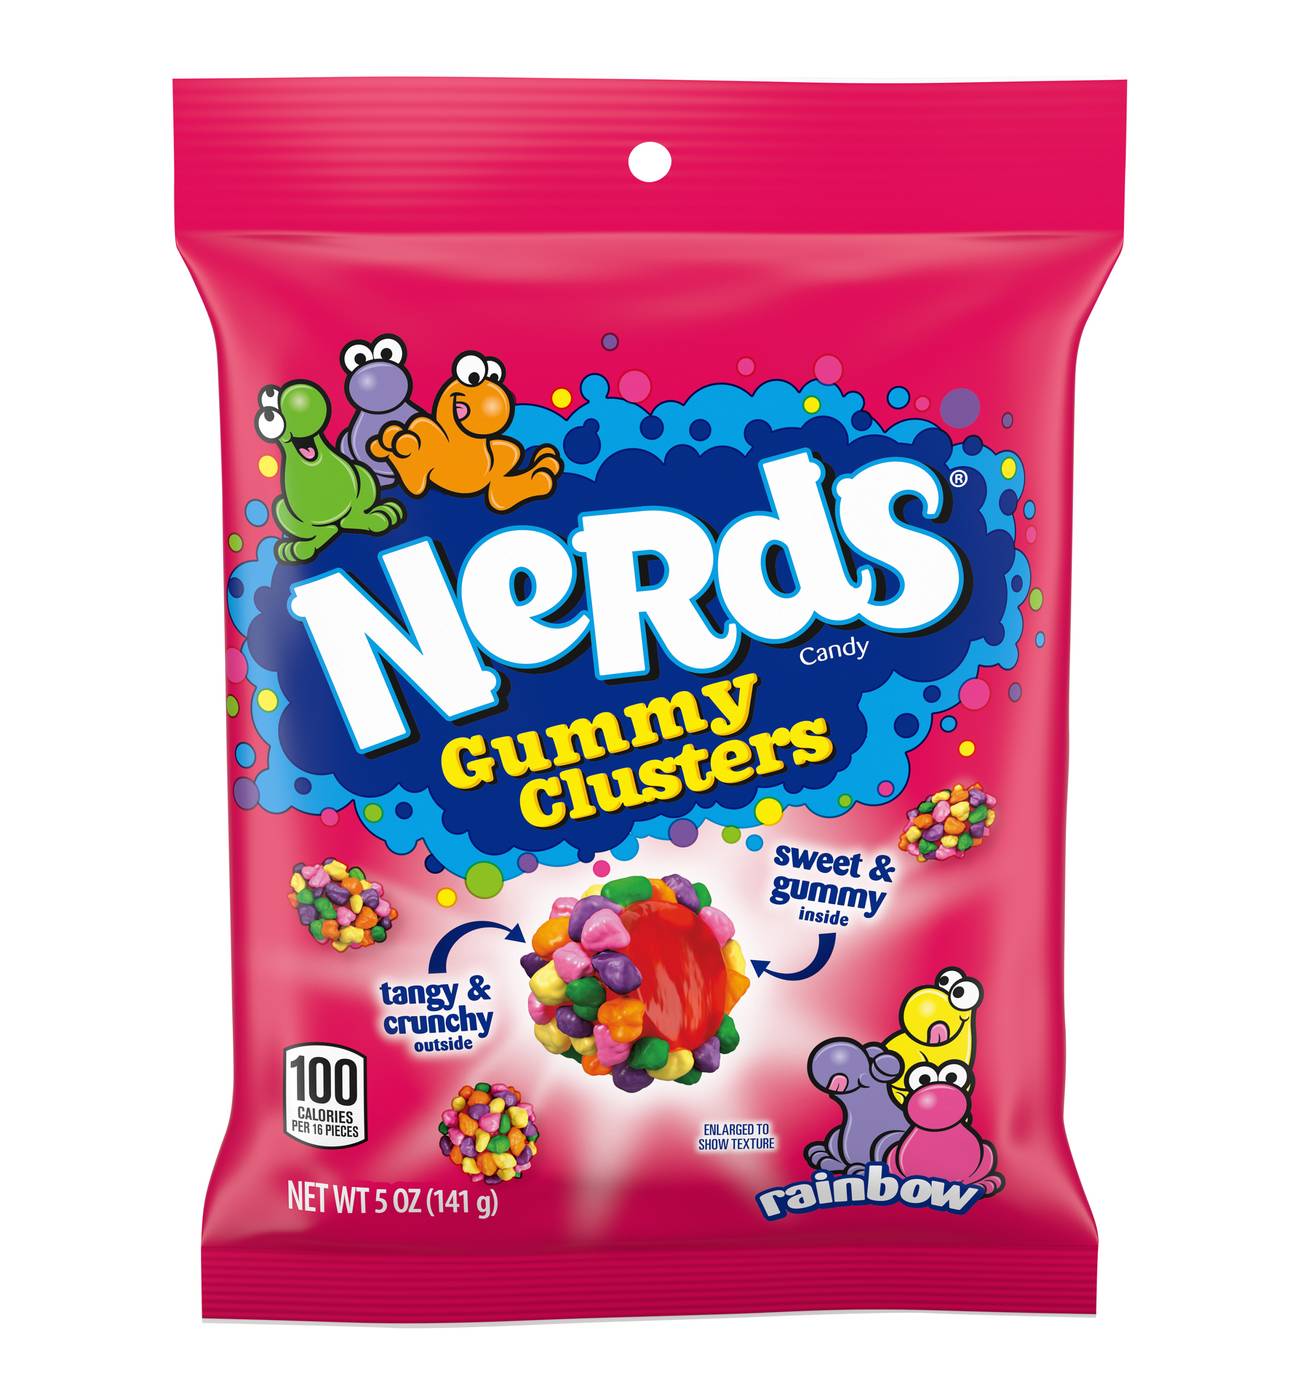 Nerds Rainbow Gummy Clusters Candy; image 1 of 3